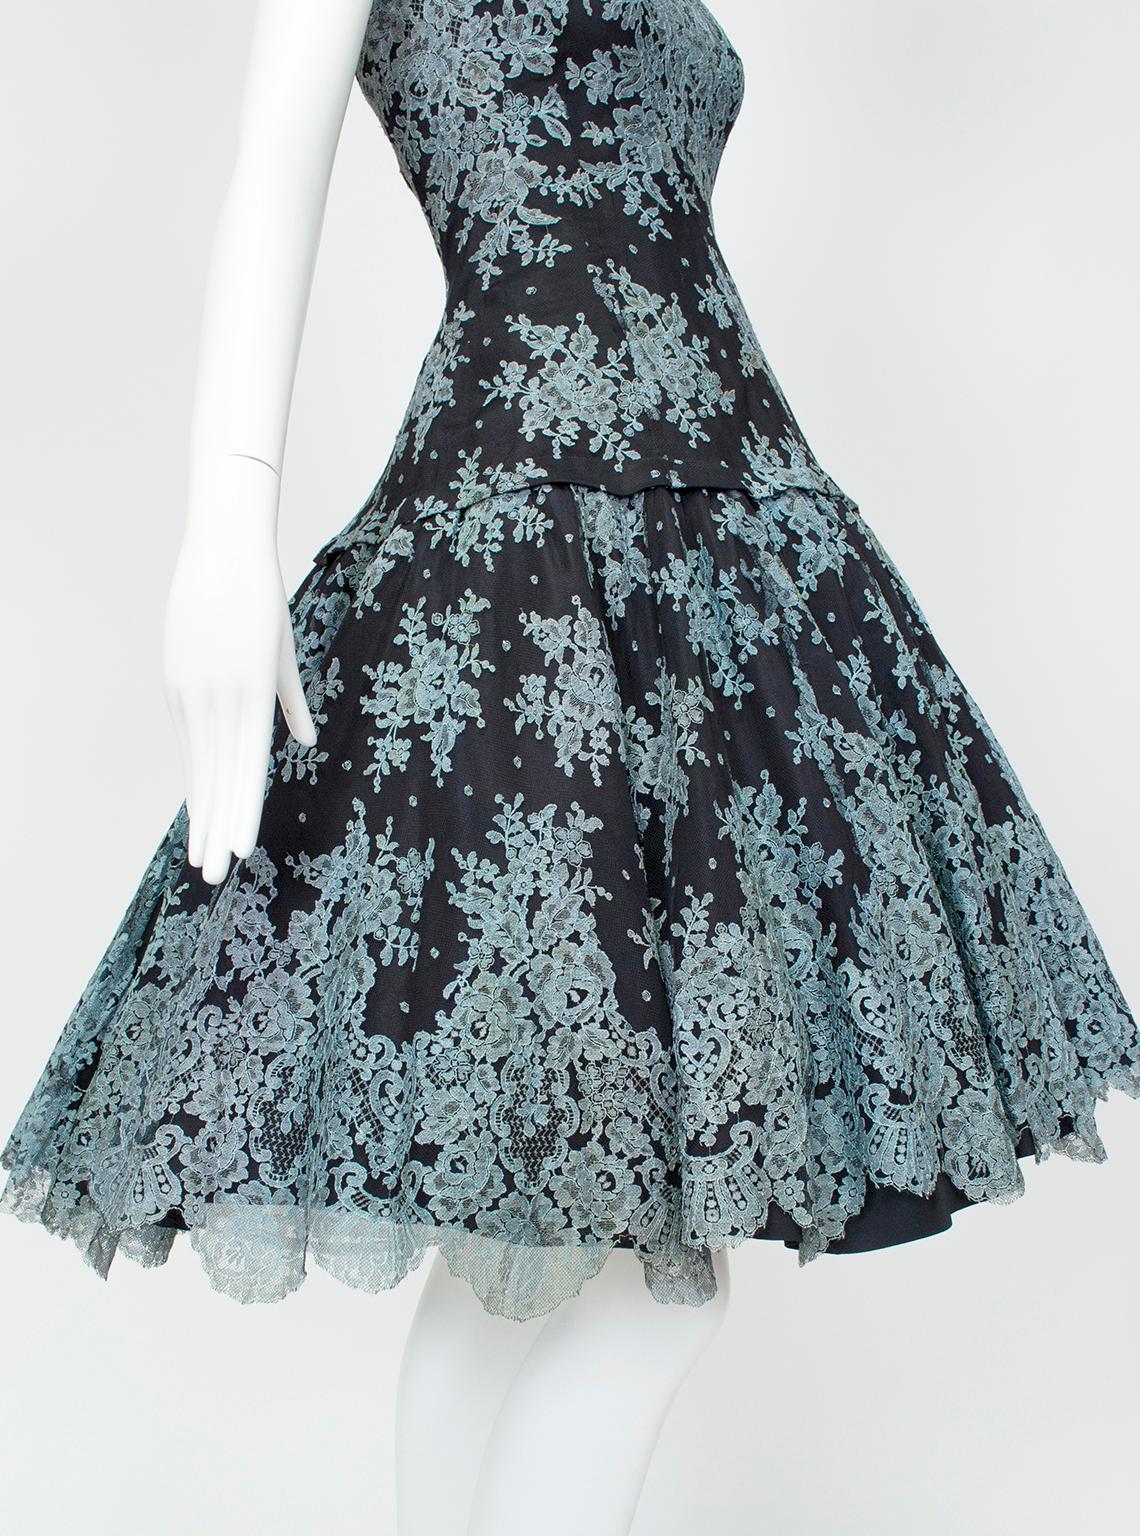 Bespoke Spanish Blue and Black Lace Mantilla Drop Waist Party Dress – XS, 1950s For Sale 3